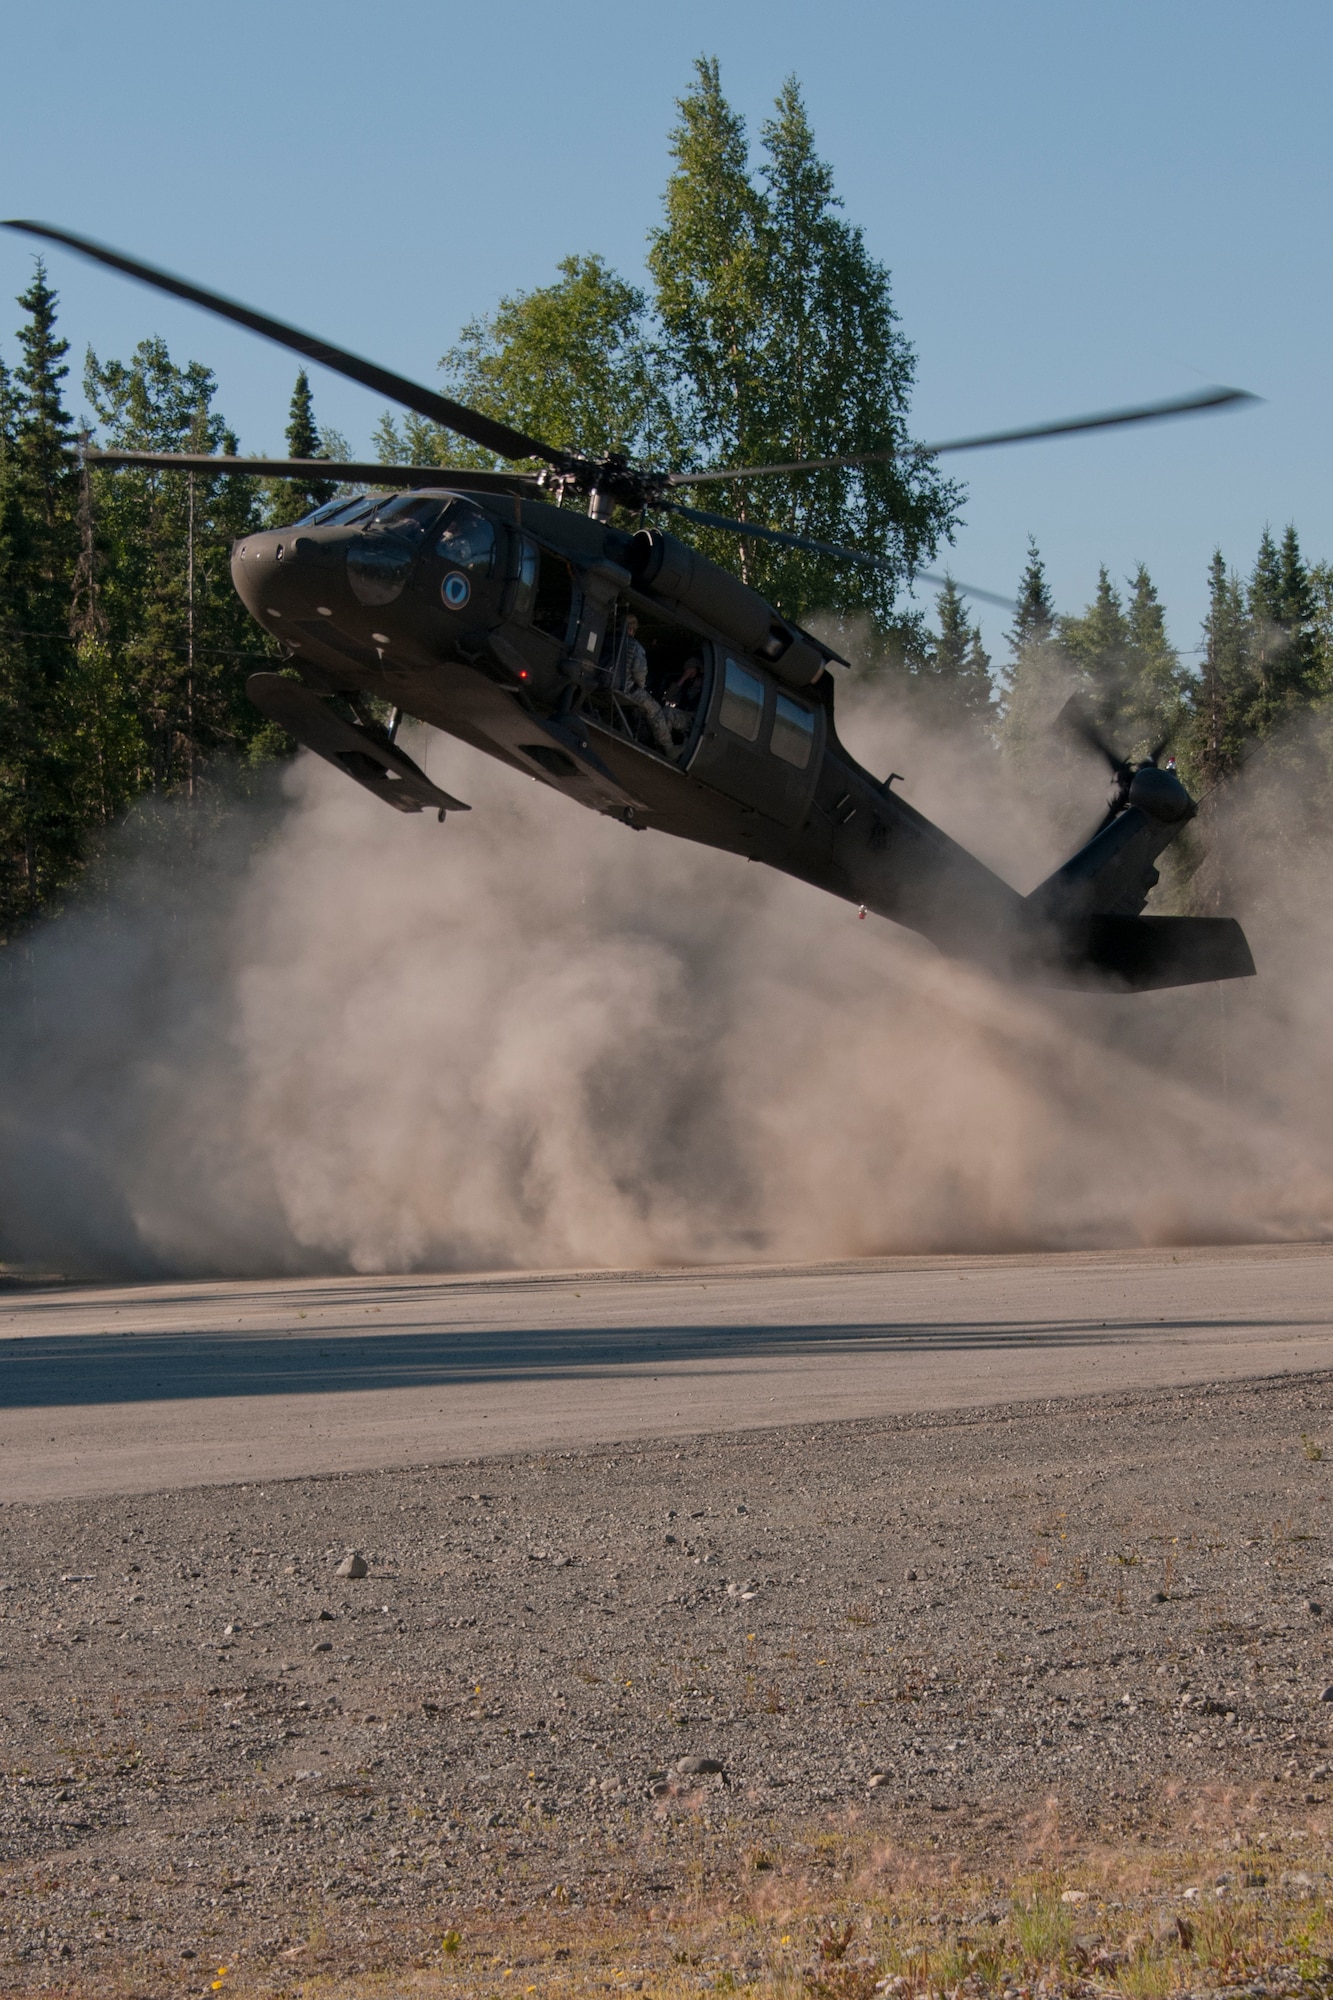 JOINT BASE ELMENDORF-RICHARDSON, Alaska -- Ohio Air Guardsmen practice tactical helocopter insertion on a UH-60 Black Hawk with Alaksa Army National Guard pilots from the 1st Battalion, 207th Aviation Regiment, here July 24, 2013. Fifteen members of the 179th Security Forces Squadron, Ohio Air National Guard, along with 28 other squadron members within their wing, performed their two-week annual training here. (U.S. Air National Guard photo by Staff Sgt N. Alicia Halla/Released)